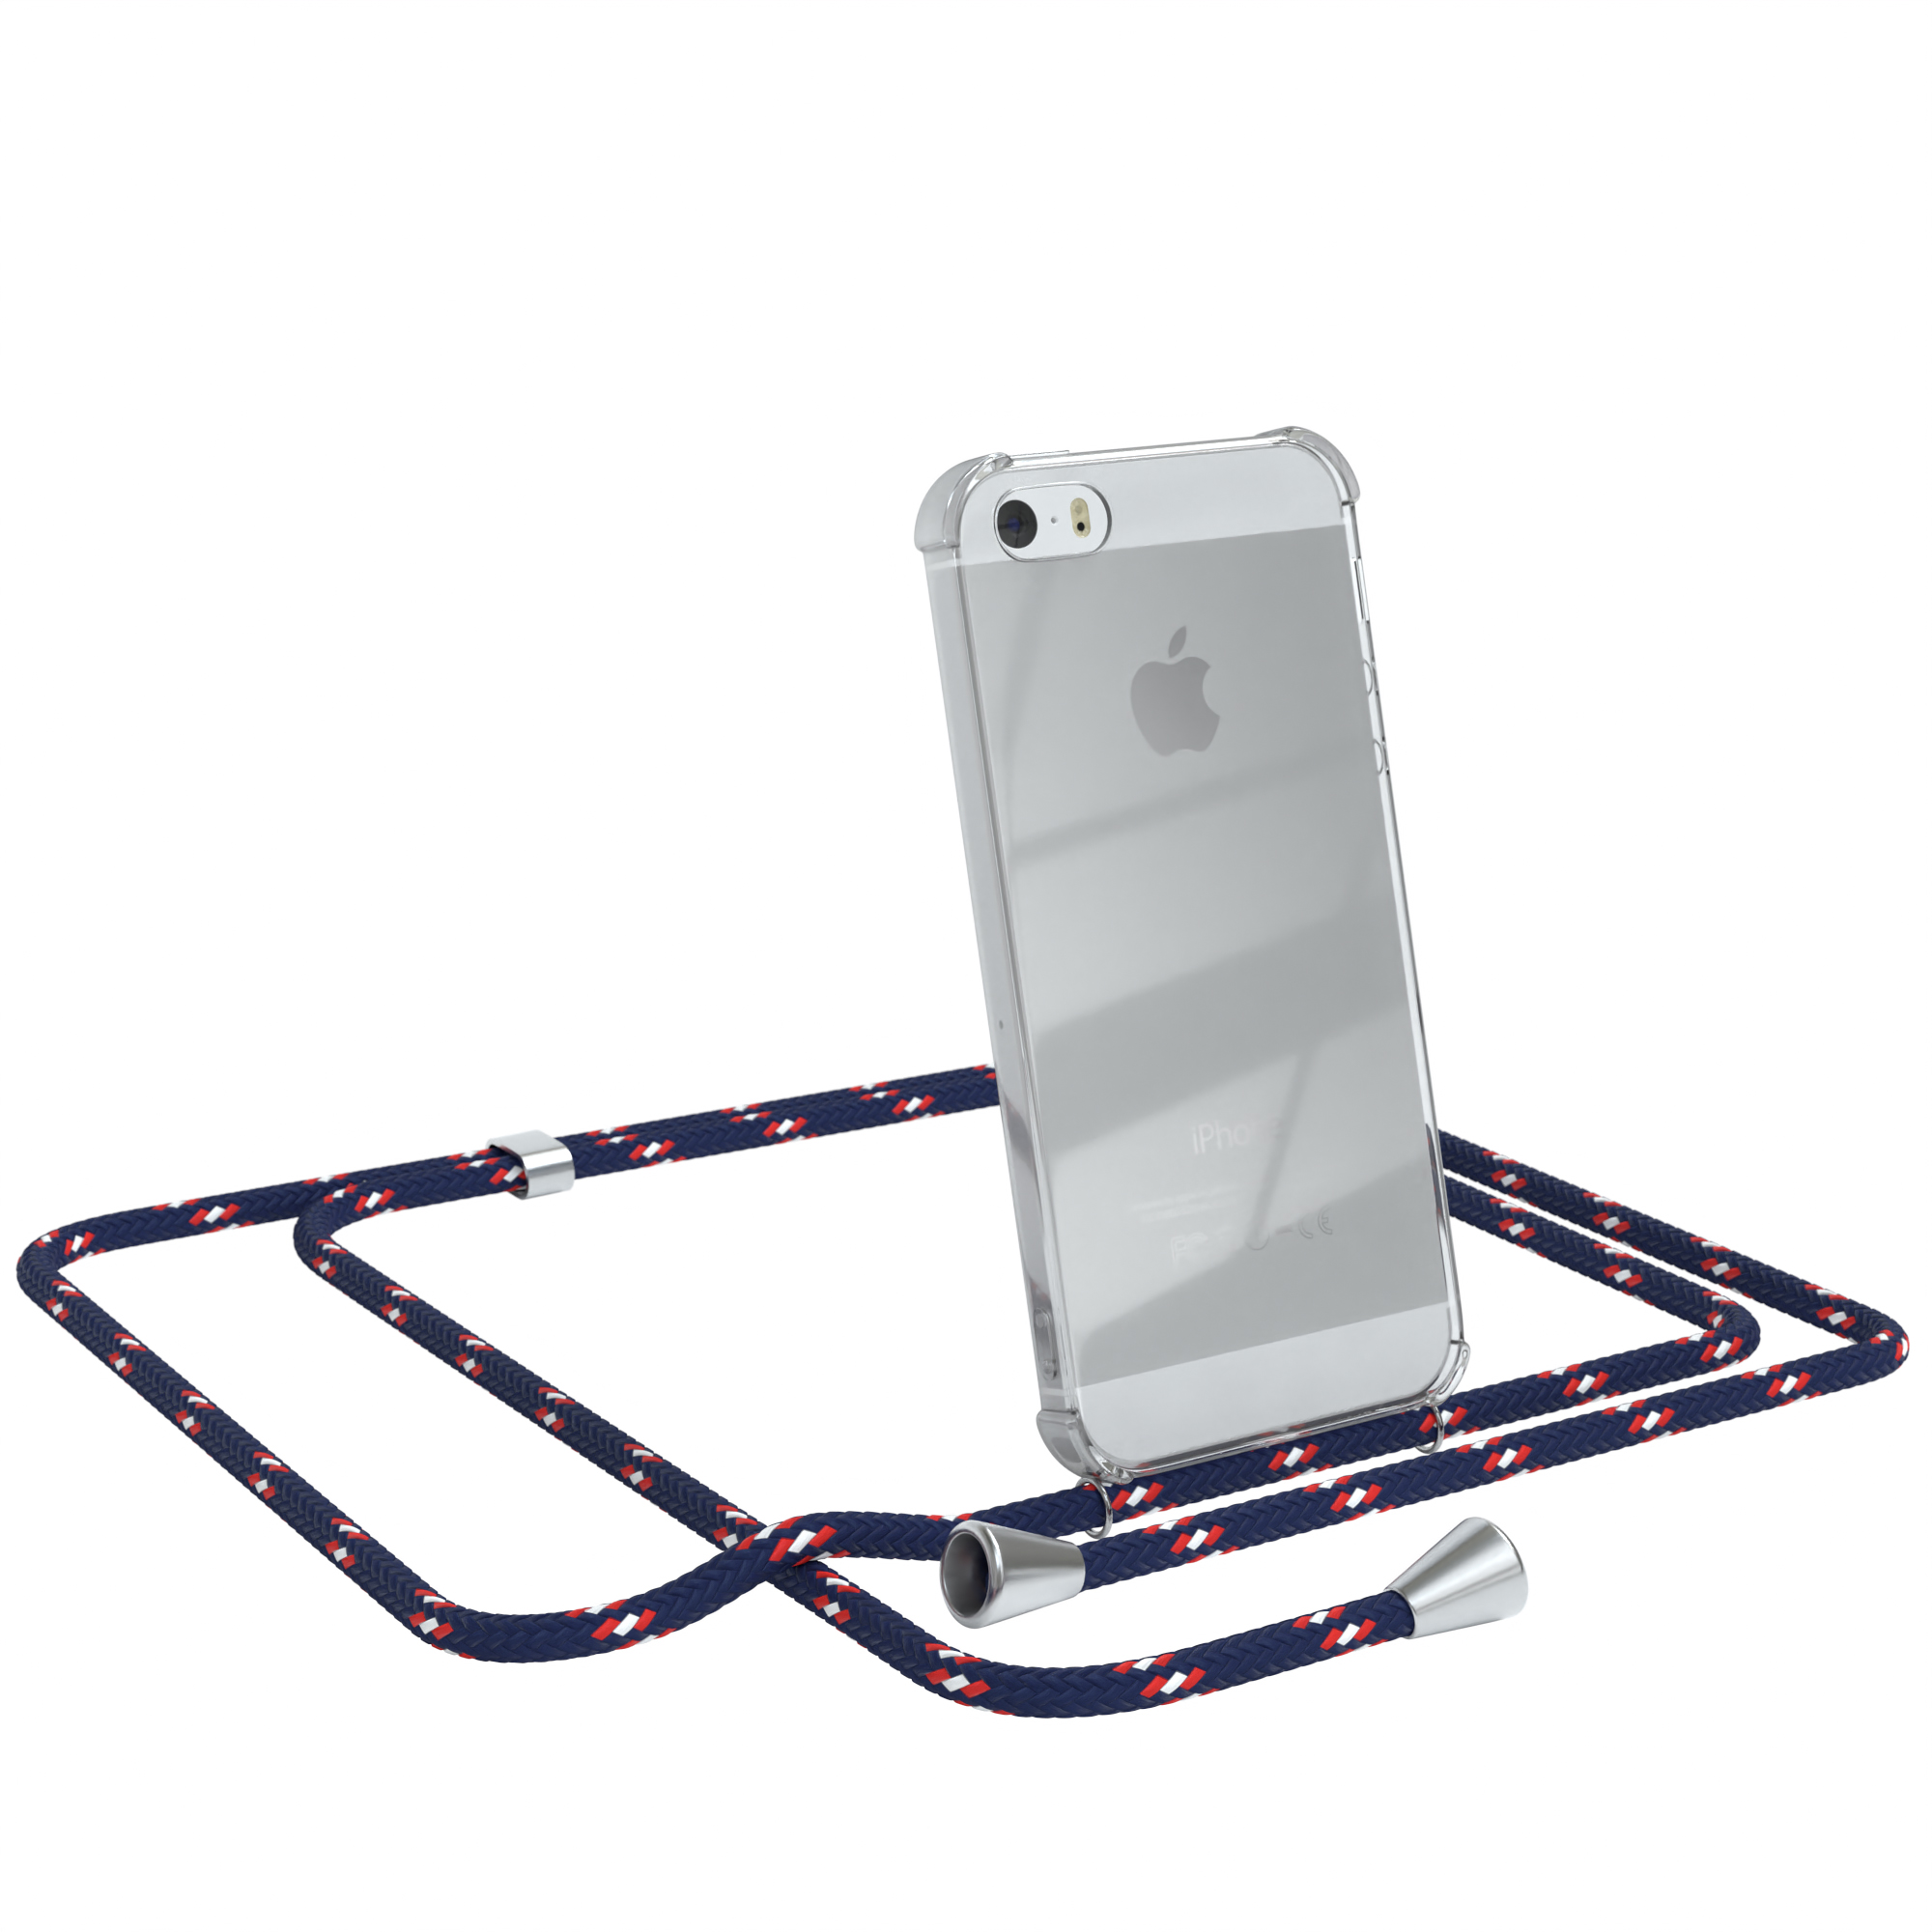 5 2016, CASE Apple, mit SE Clear Clips Umhängetasche, 5S, iPhone Cover EAZY / iPhone Silber Blau Umhängeband, Camouflage /